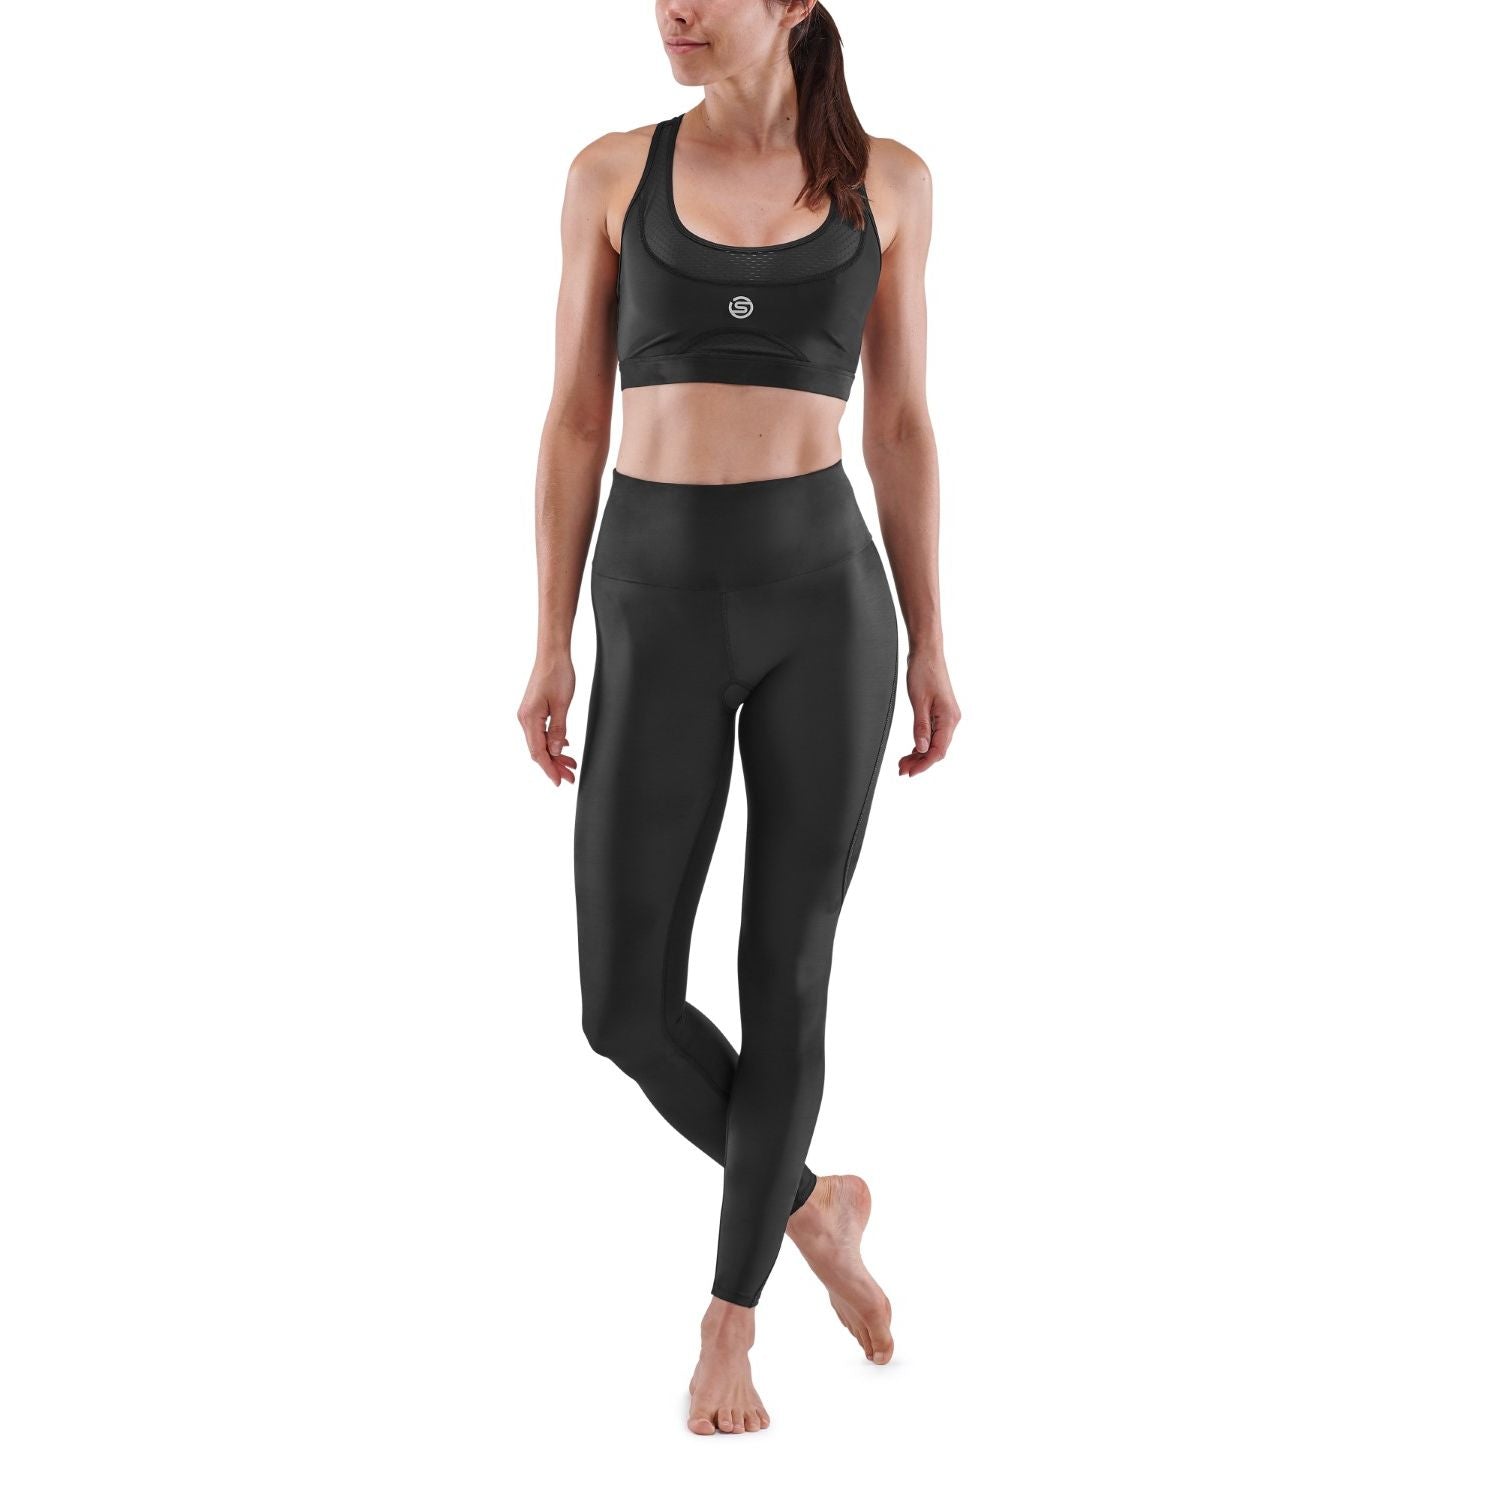 Women's Leggings & Capris - Running Tights - Compression Fit - Under Armour  NZ